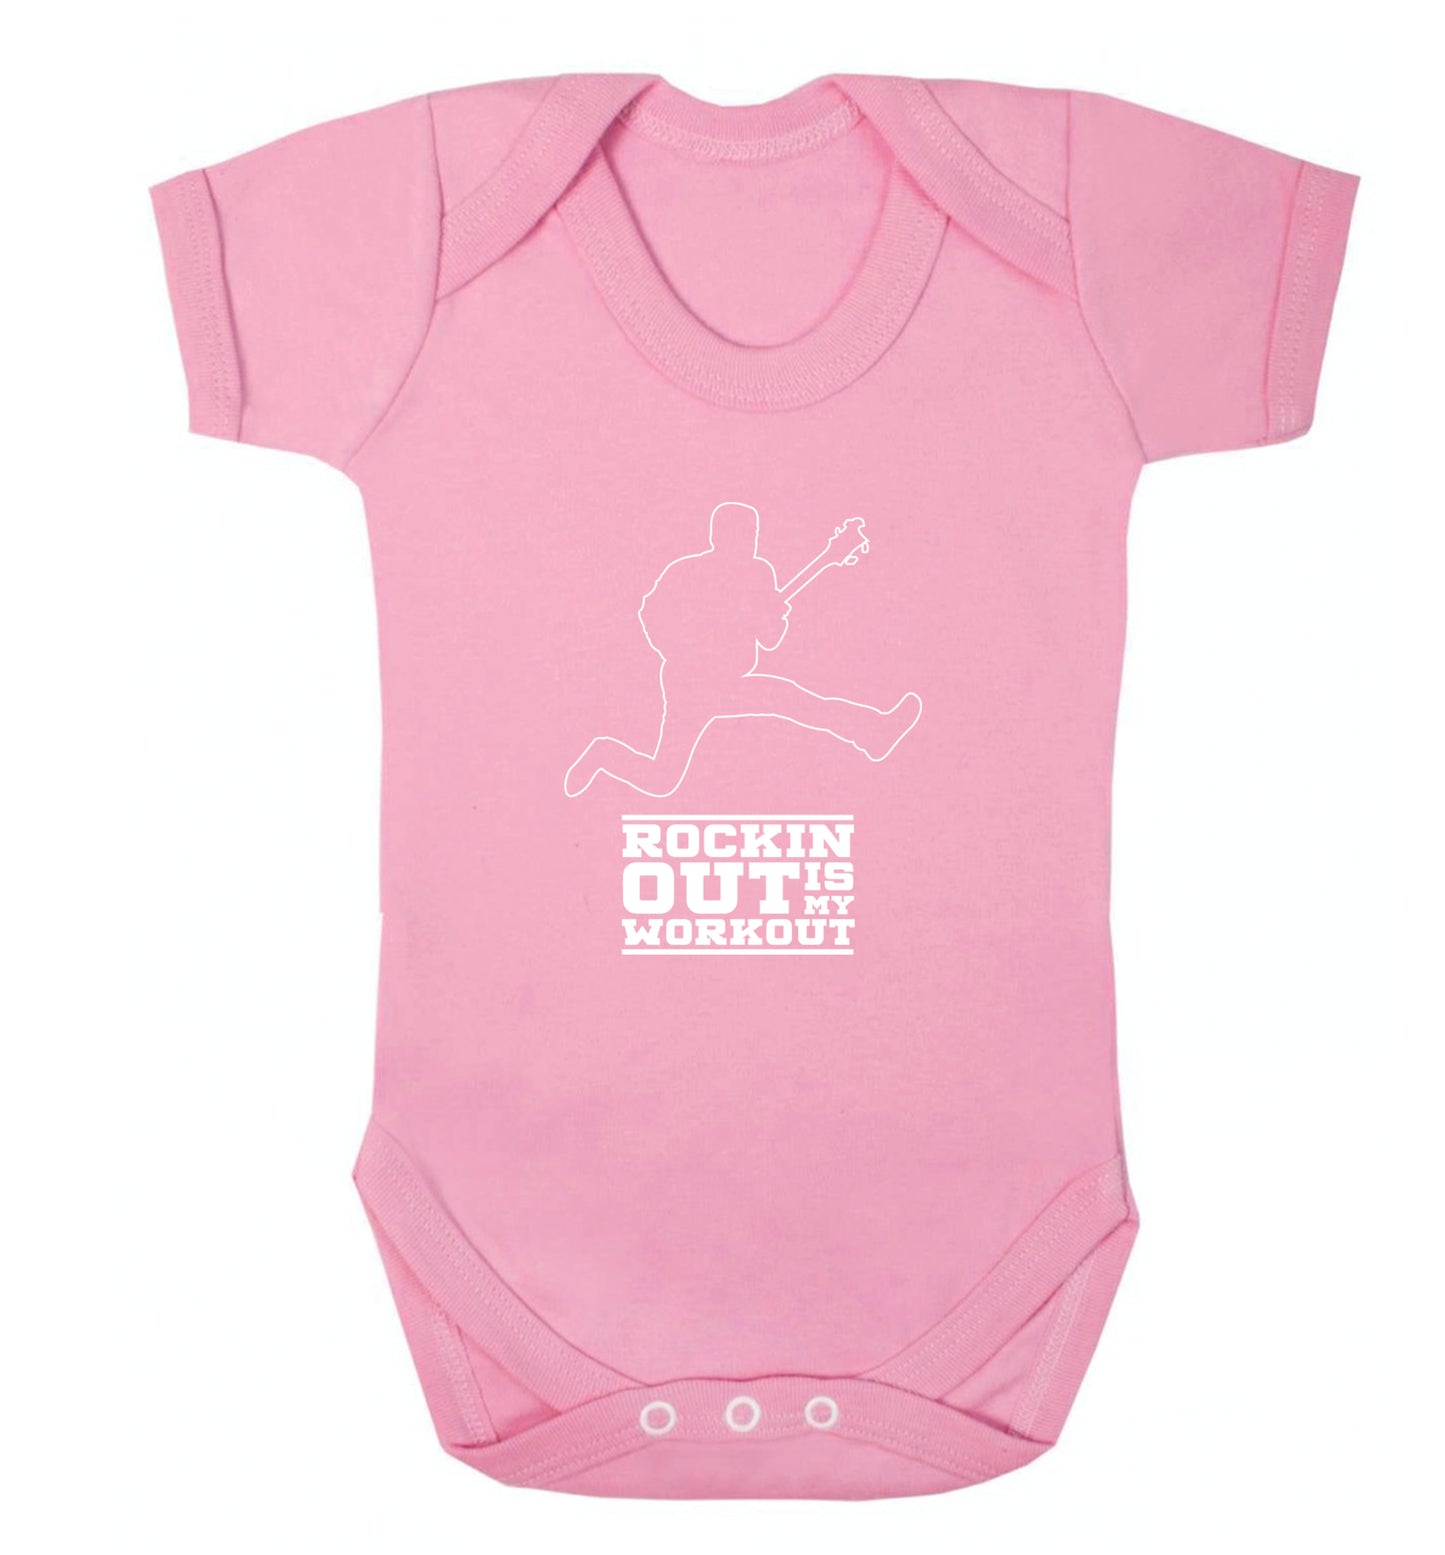 Rockin out is my workout 2 Baby Vest pale pink 18-24 months